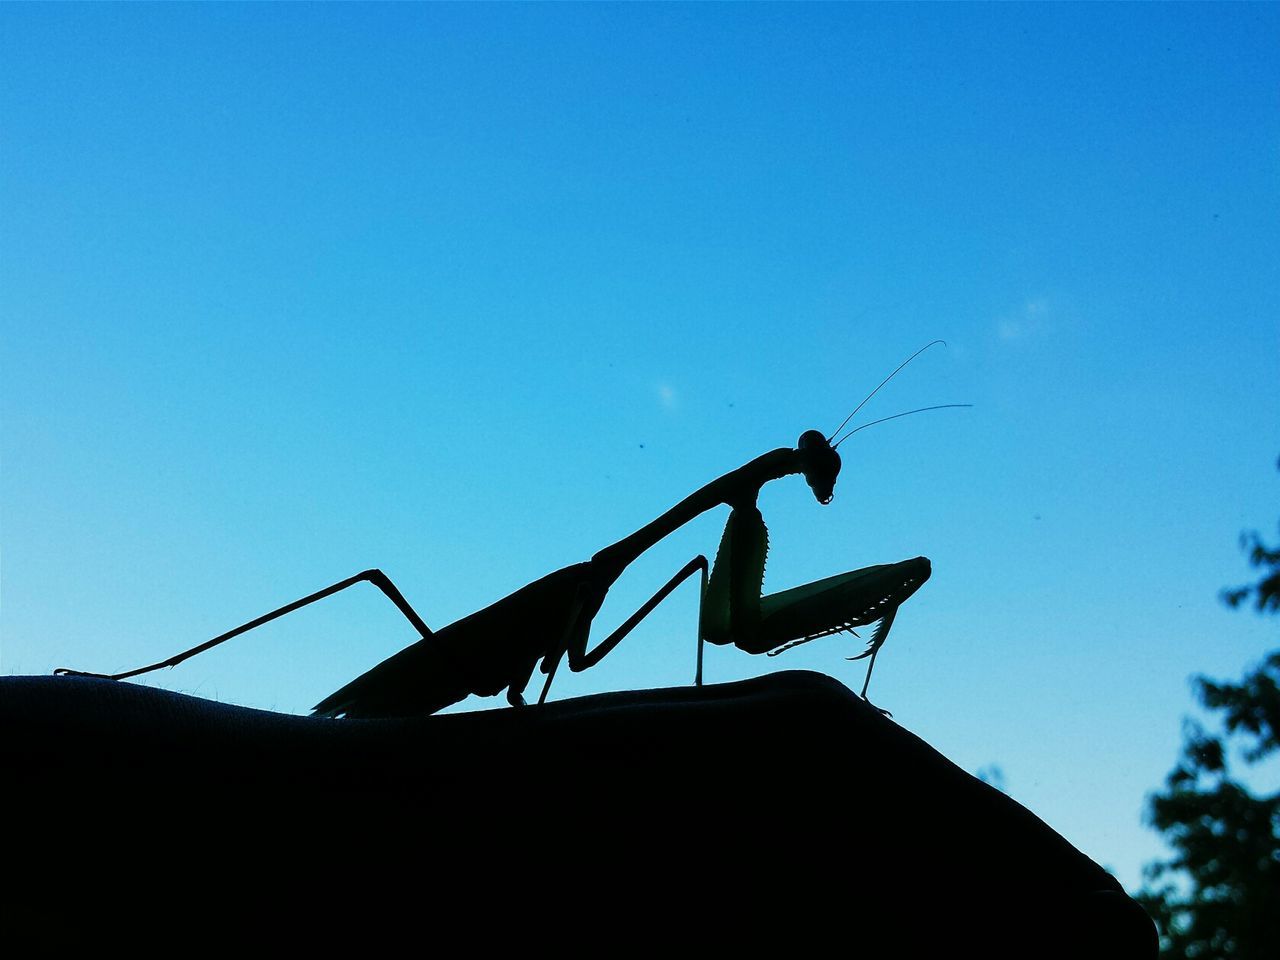 Silhouette of insect